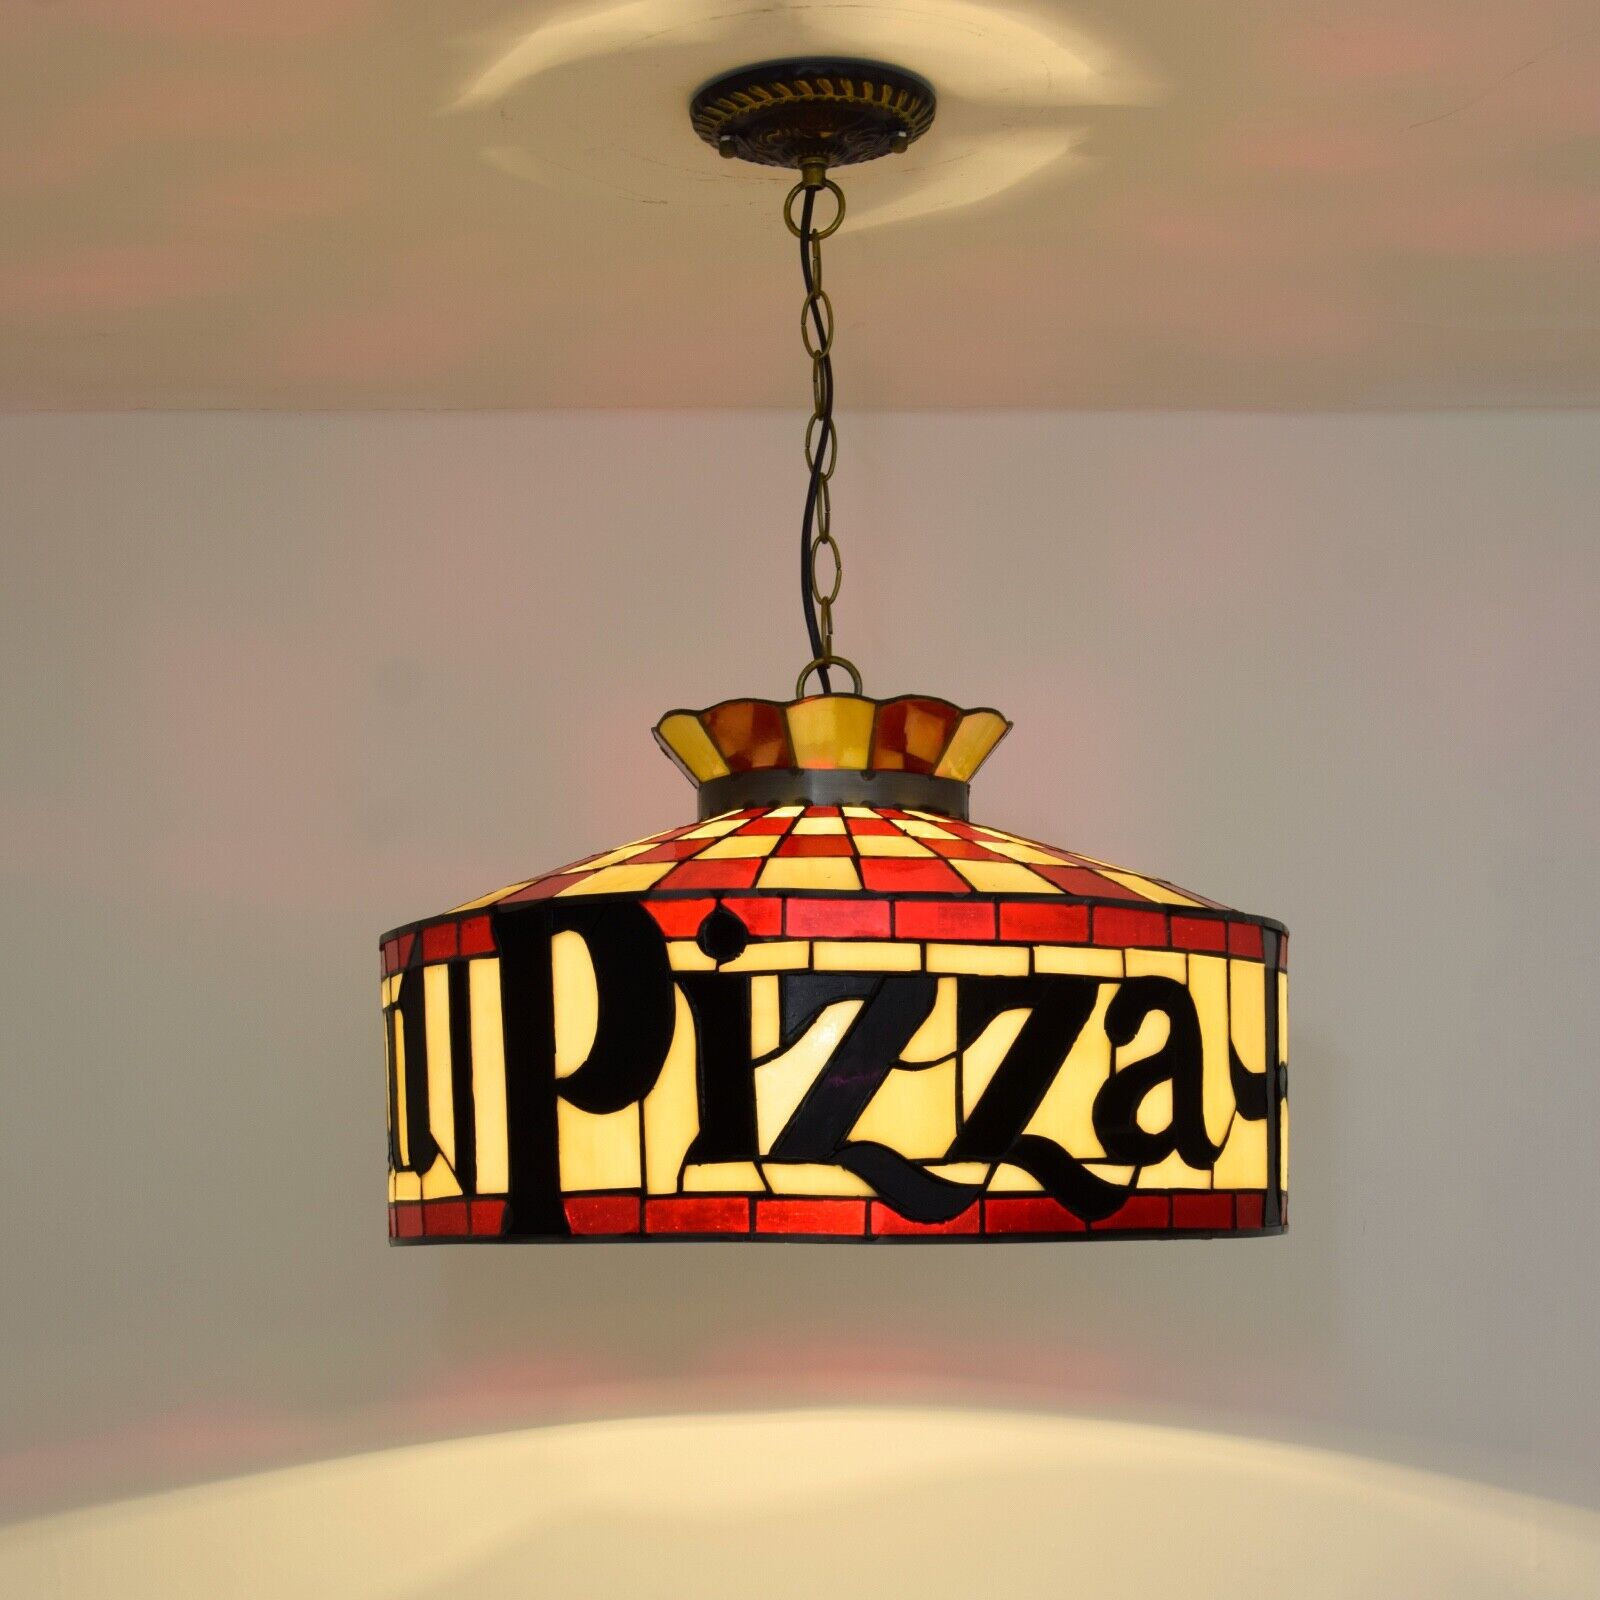 Pizza Hut Lamp Full-Size Tiffany Style Light with Chain - SHIPS TODAY FROM USA